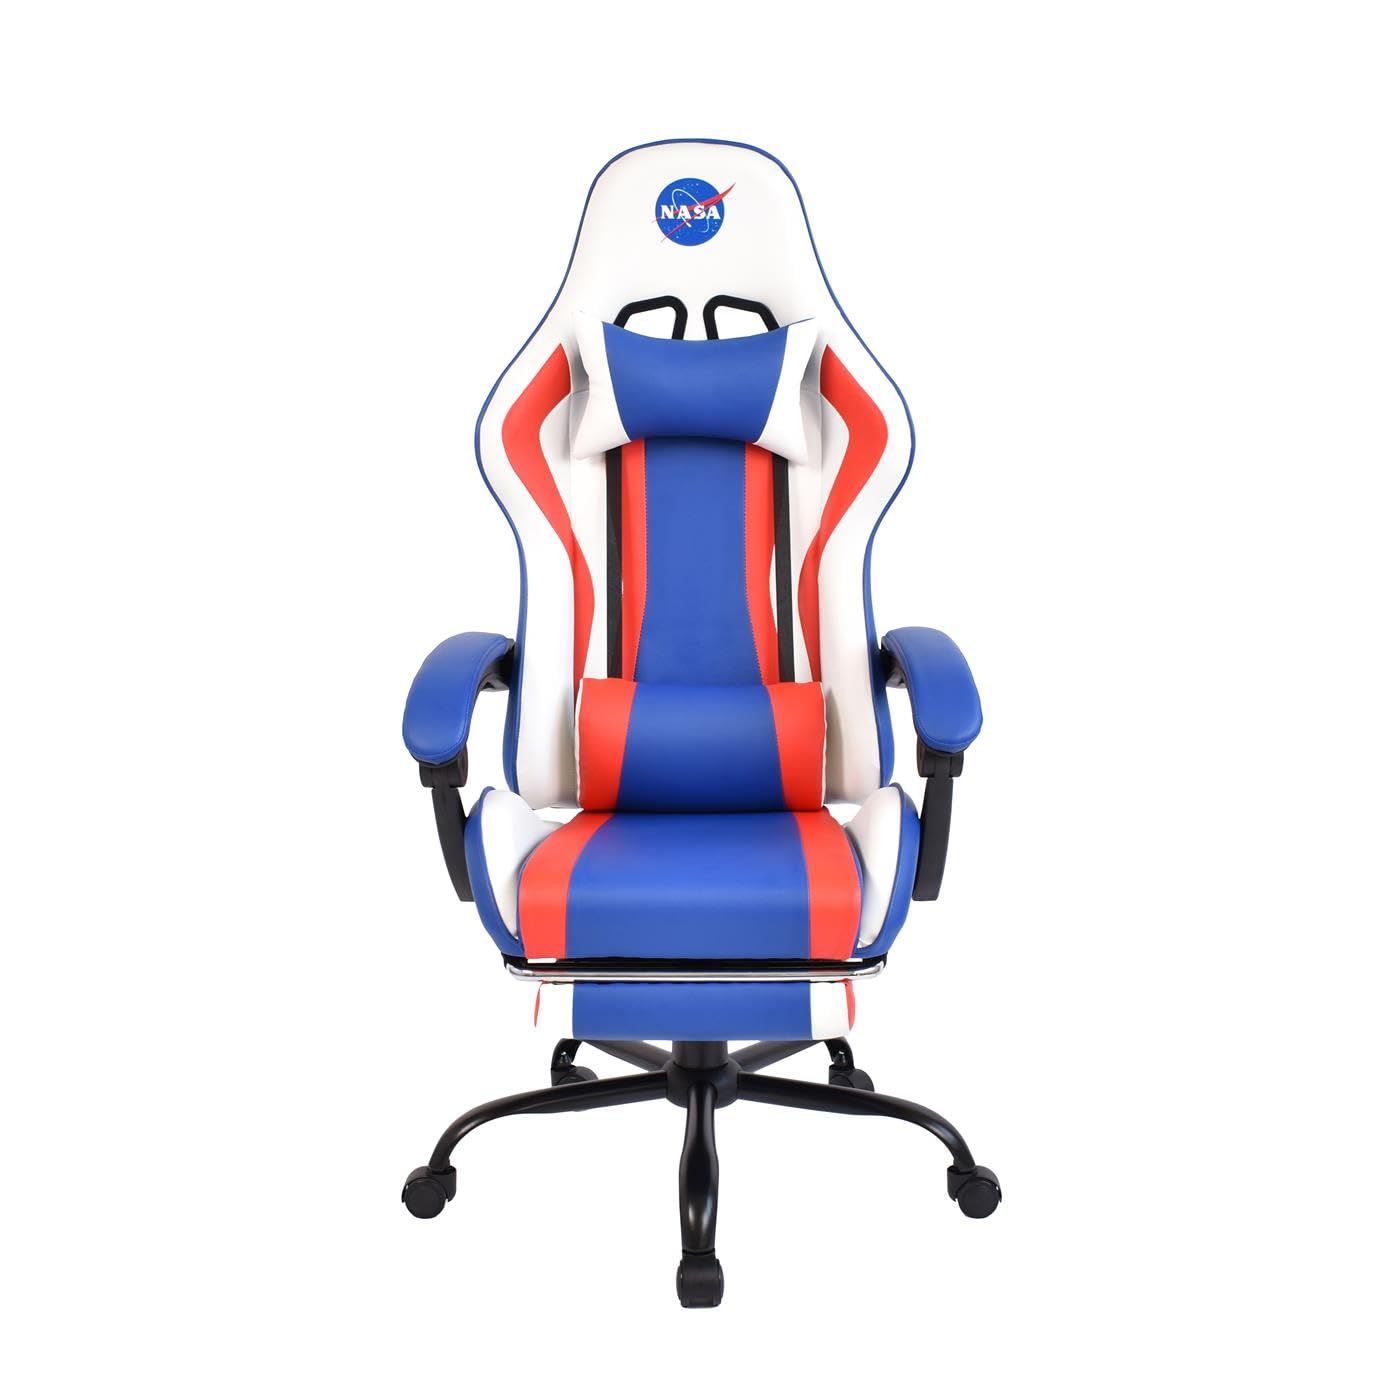 DISCOVERY GAMING CHAIR